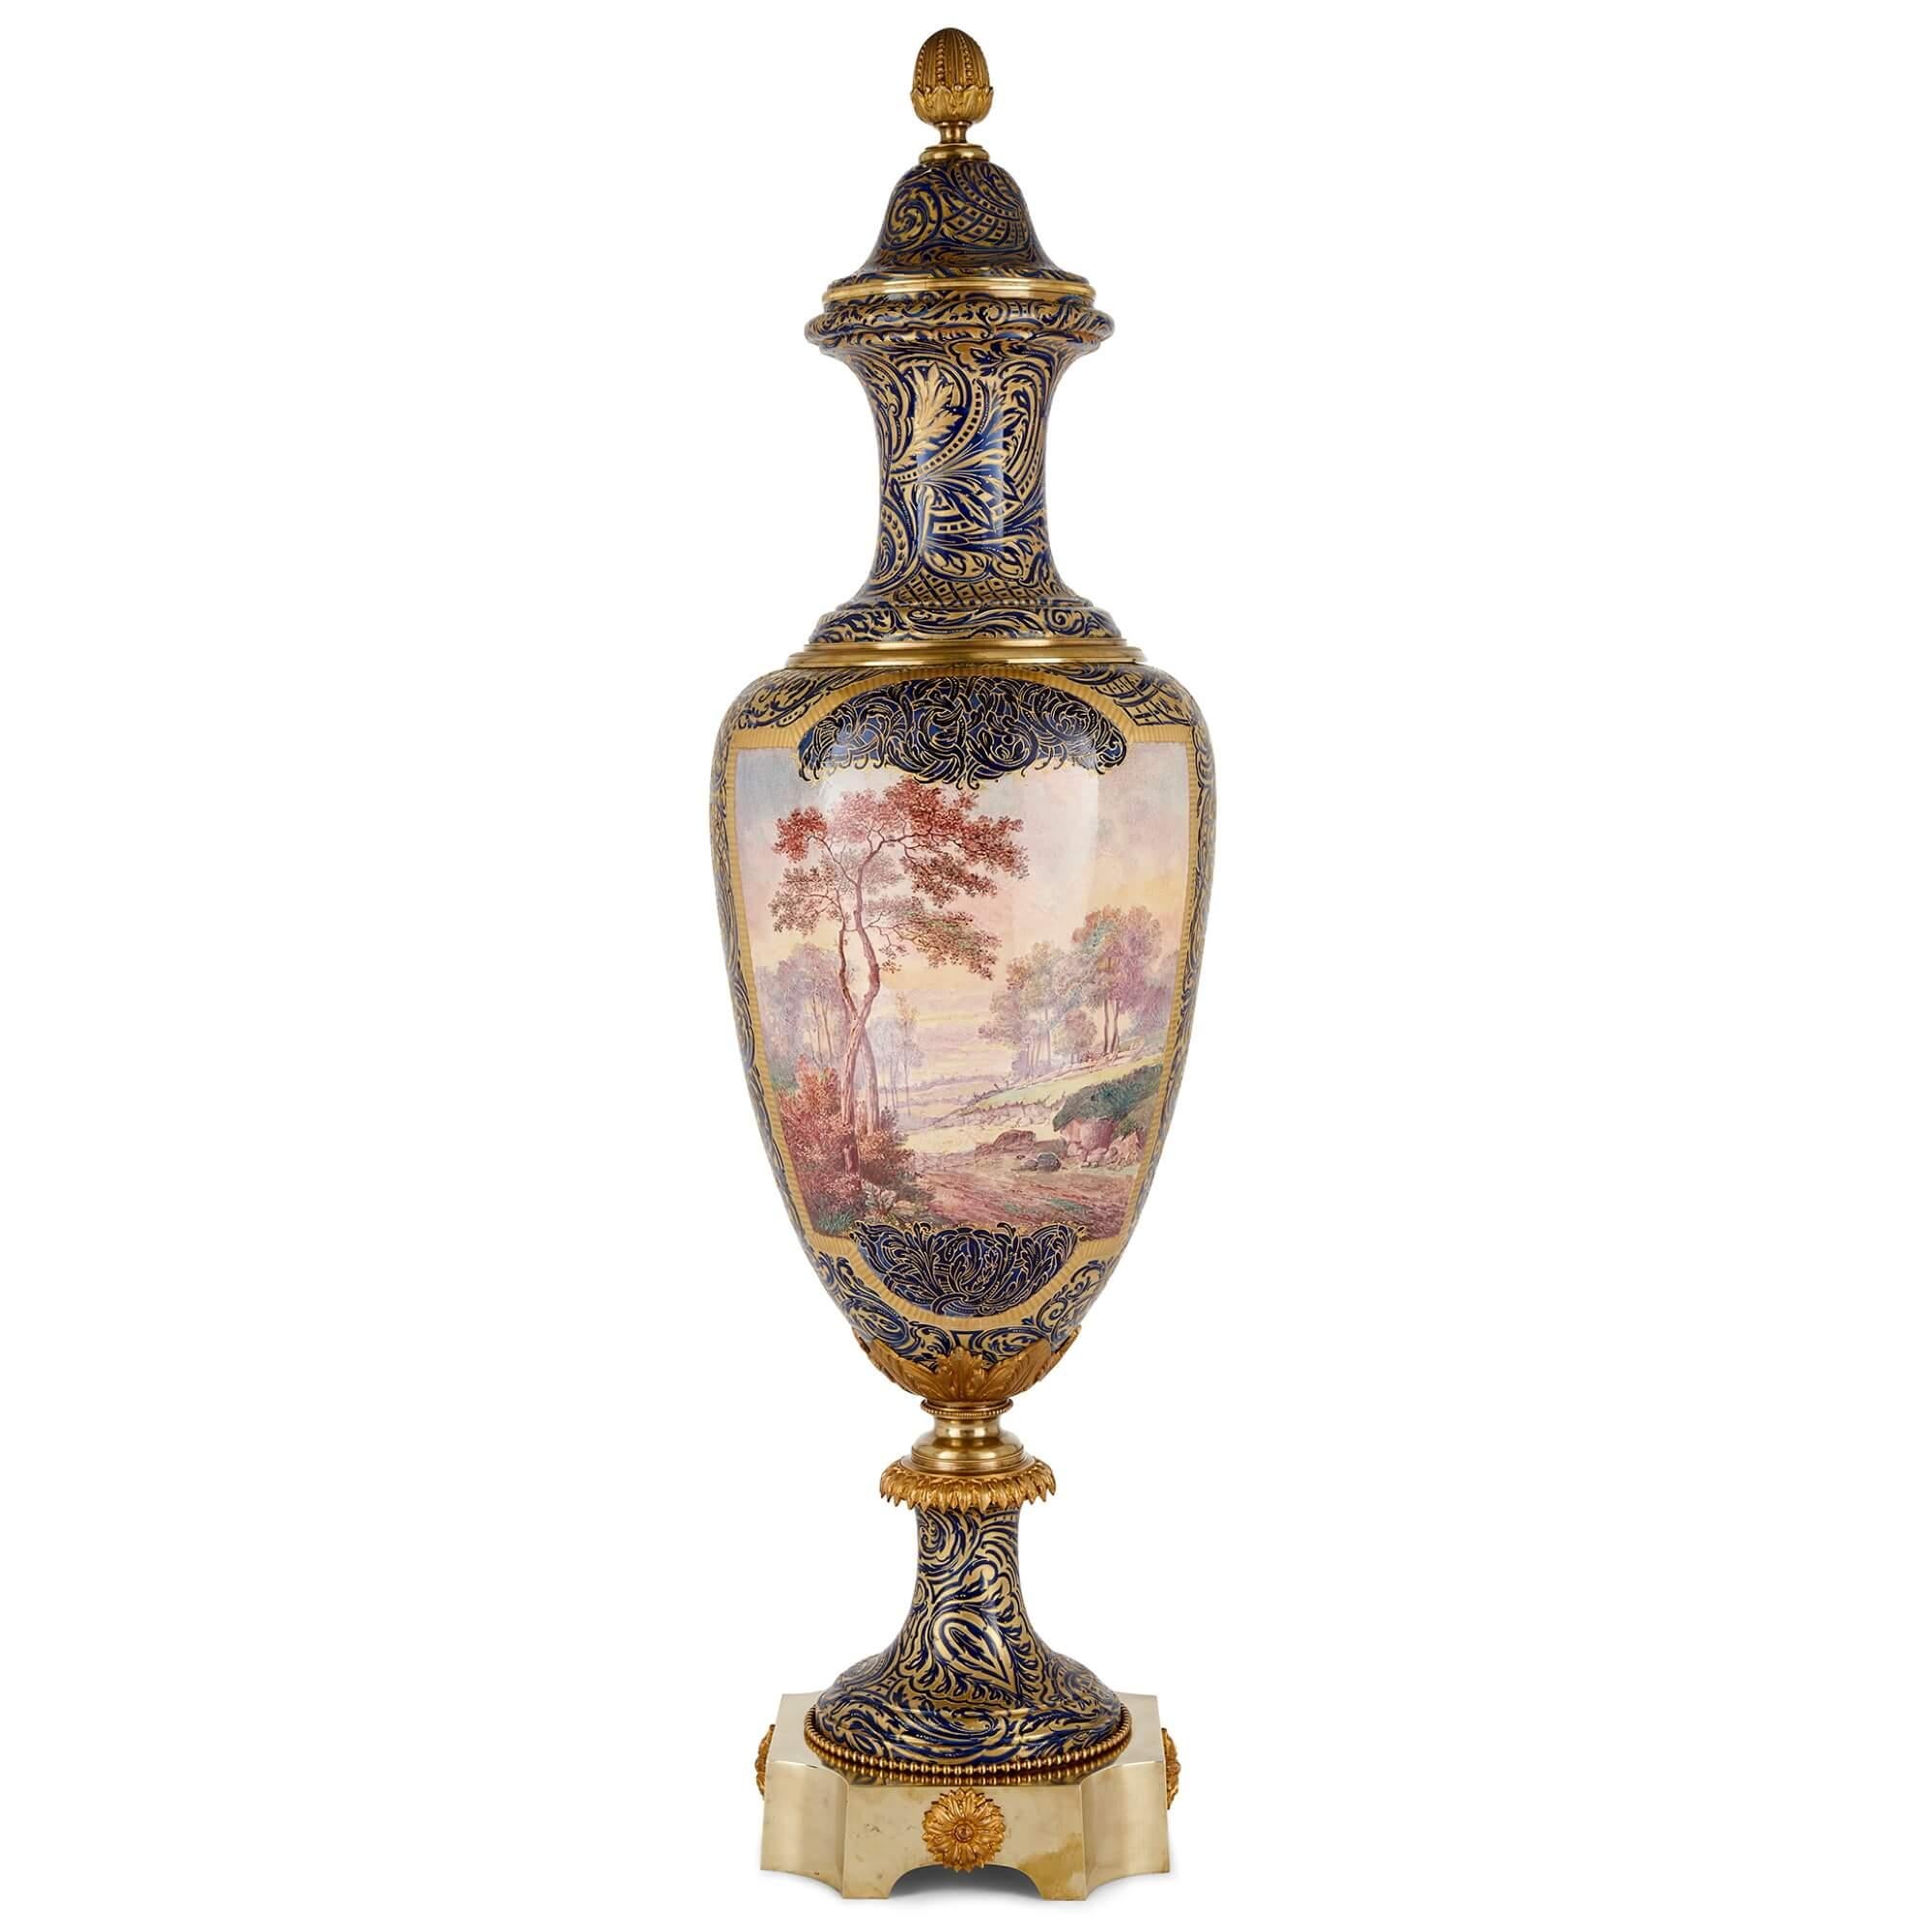 A large Sèvres style, mounted and gilt, painted porcelain vase
French, Early 20th Century
Height 132cm, diameter 37cm

This exquisite piece is a beautiful Sèvres style porcelain vase, with painted cartouches on each face, mounted, and adorned